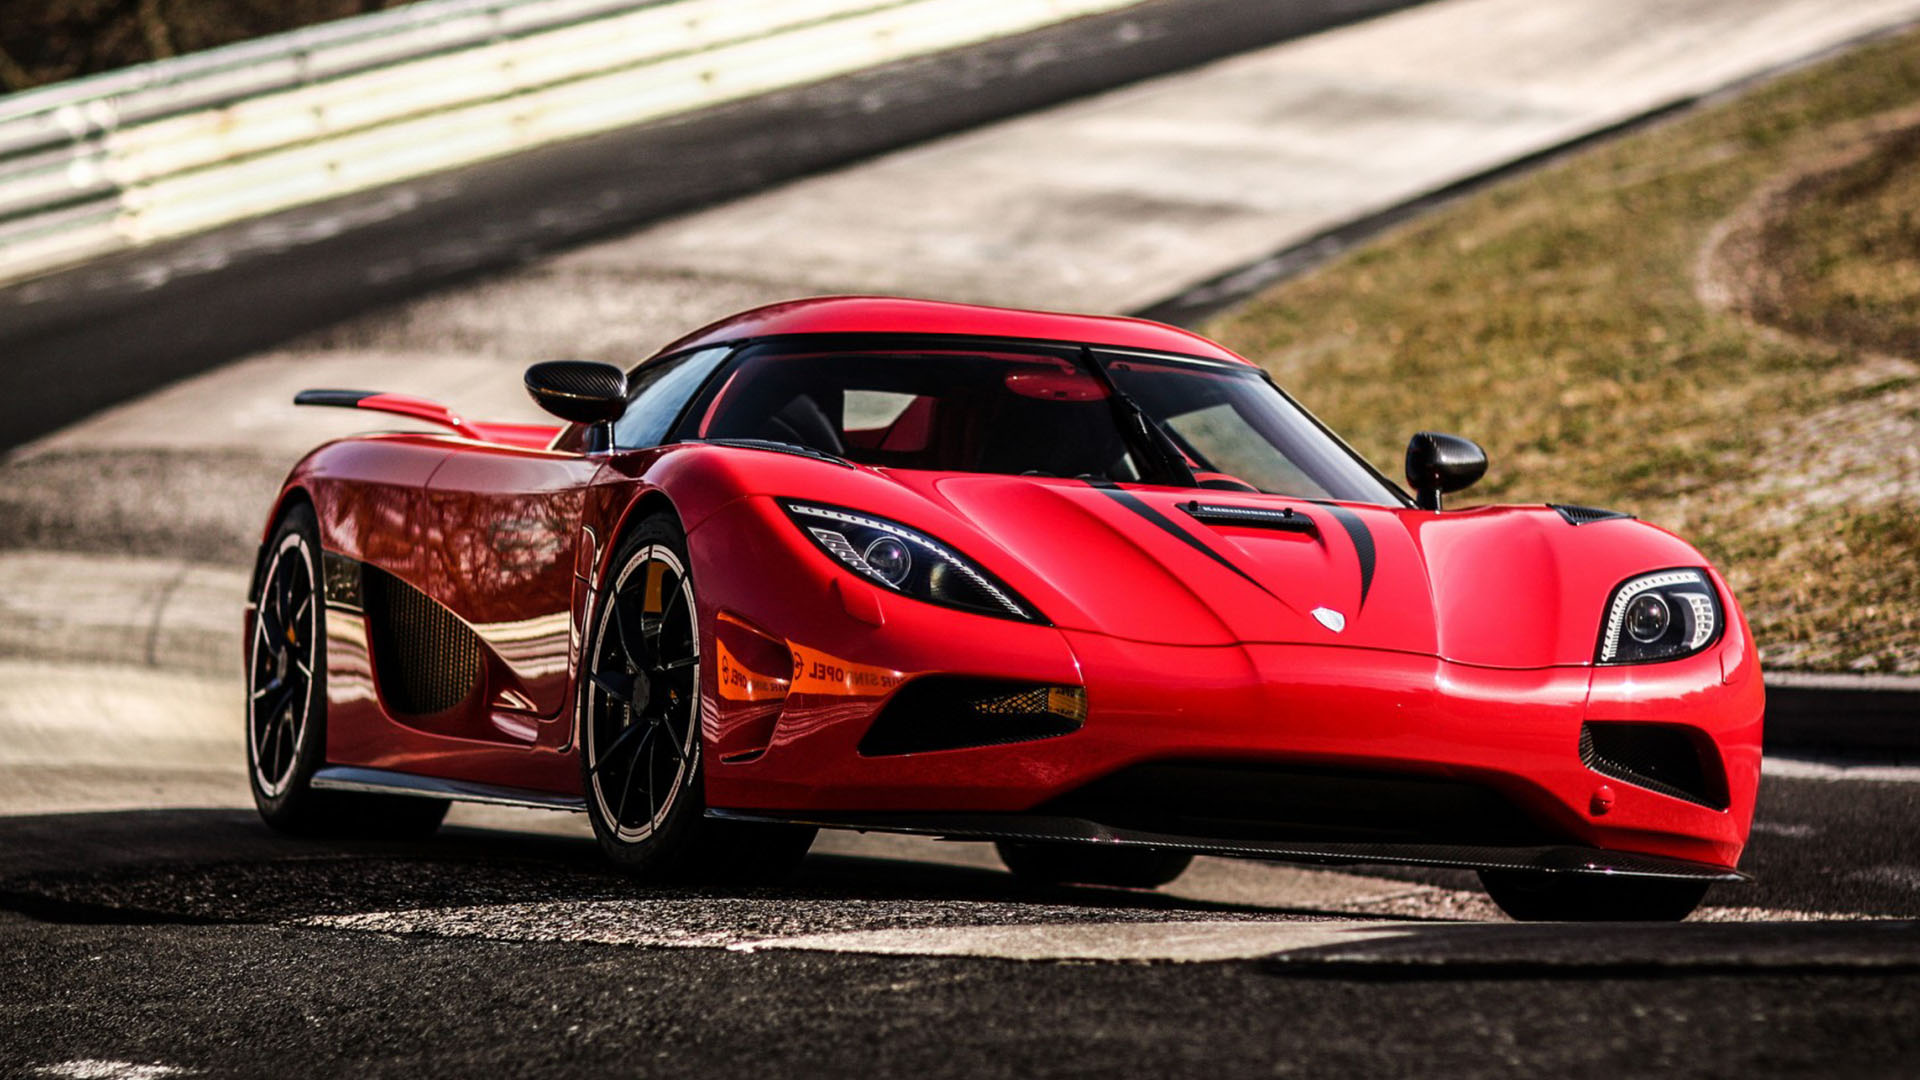 The king of the (not quite) 7 cars faster than a speeding bullet - the Koenigsegg Agera R.